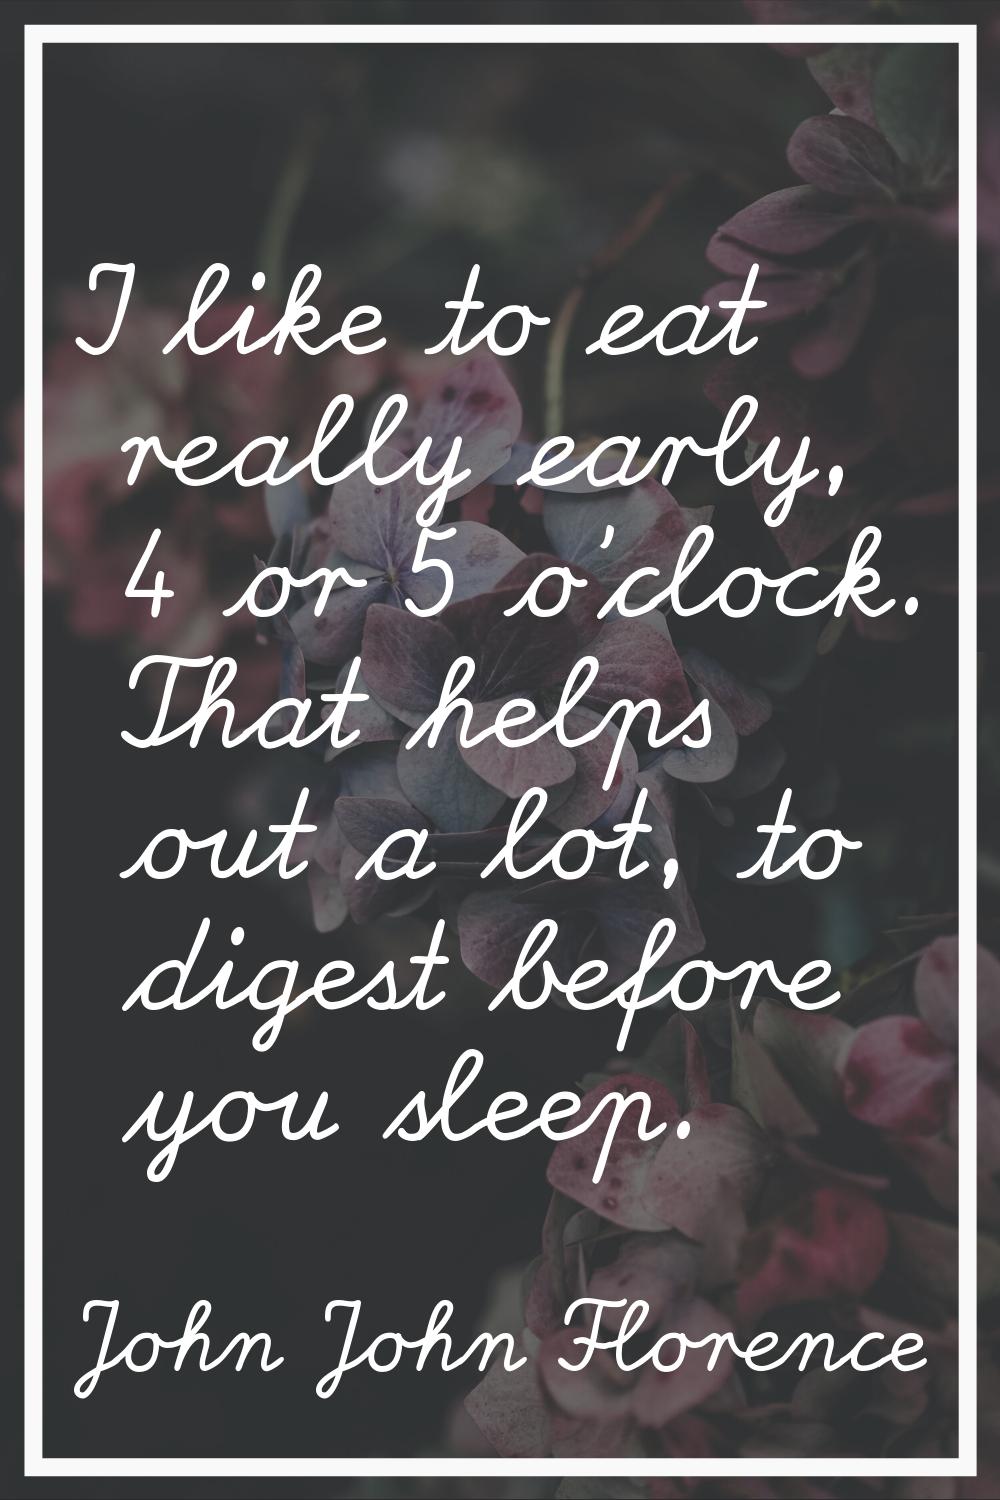 I like to eat really early, 4 or 5 o'clock. That helps out a lot, to digest before you sleep.